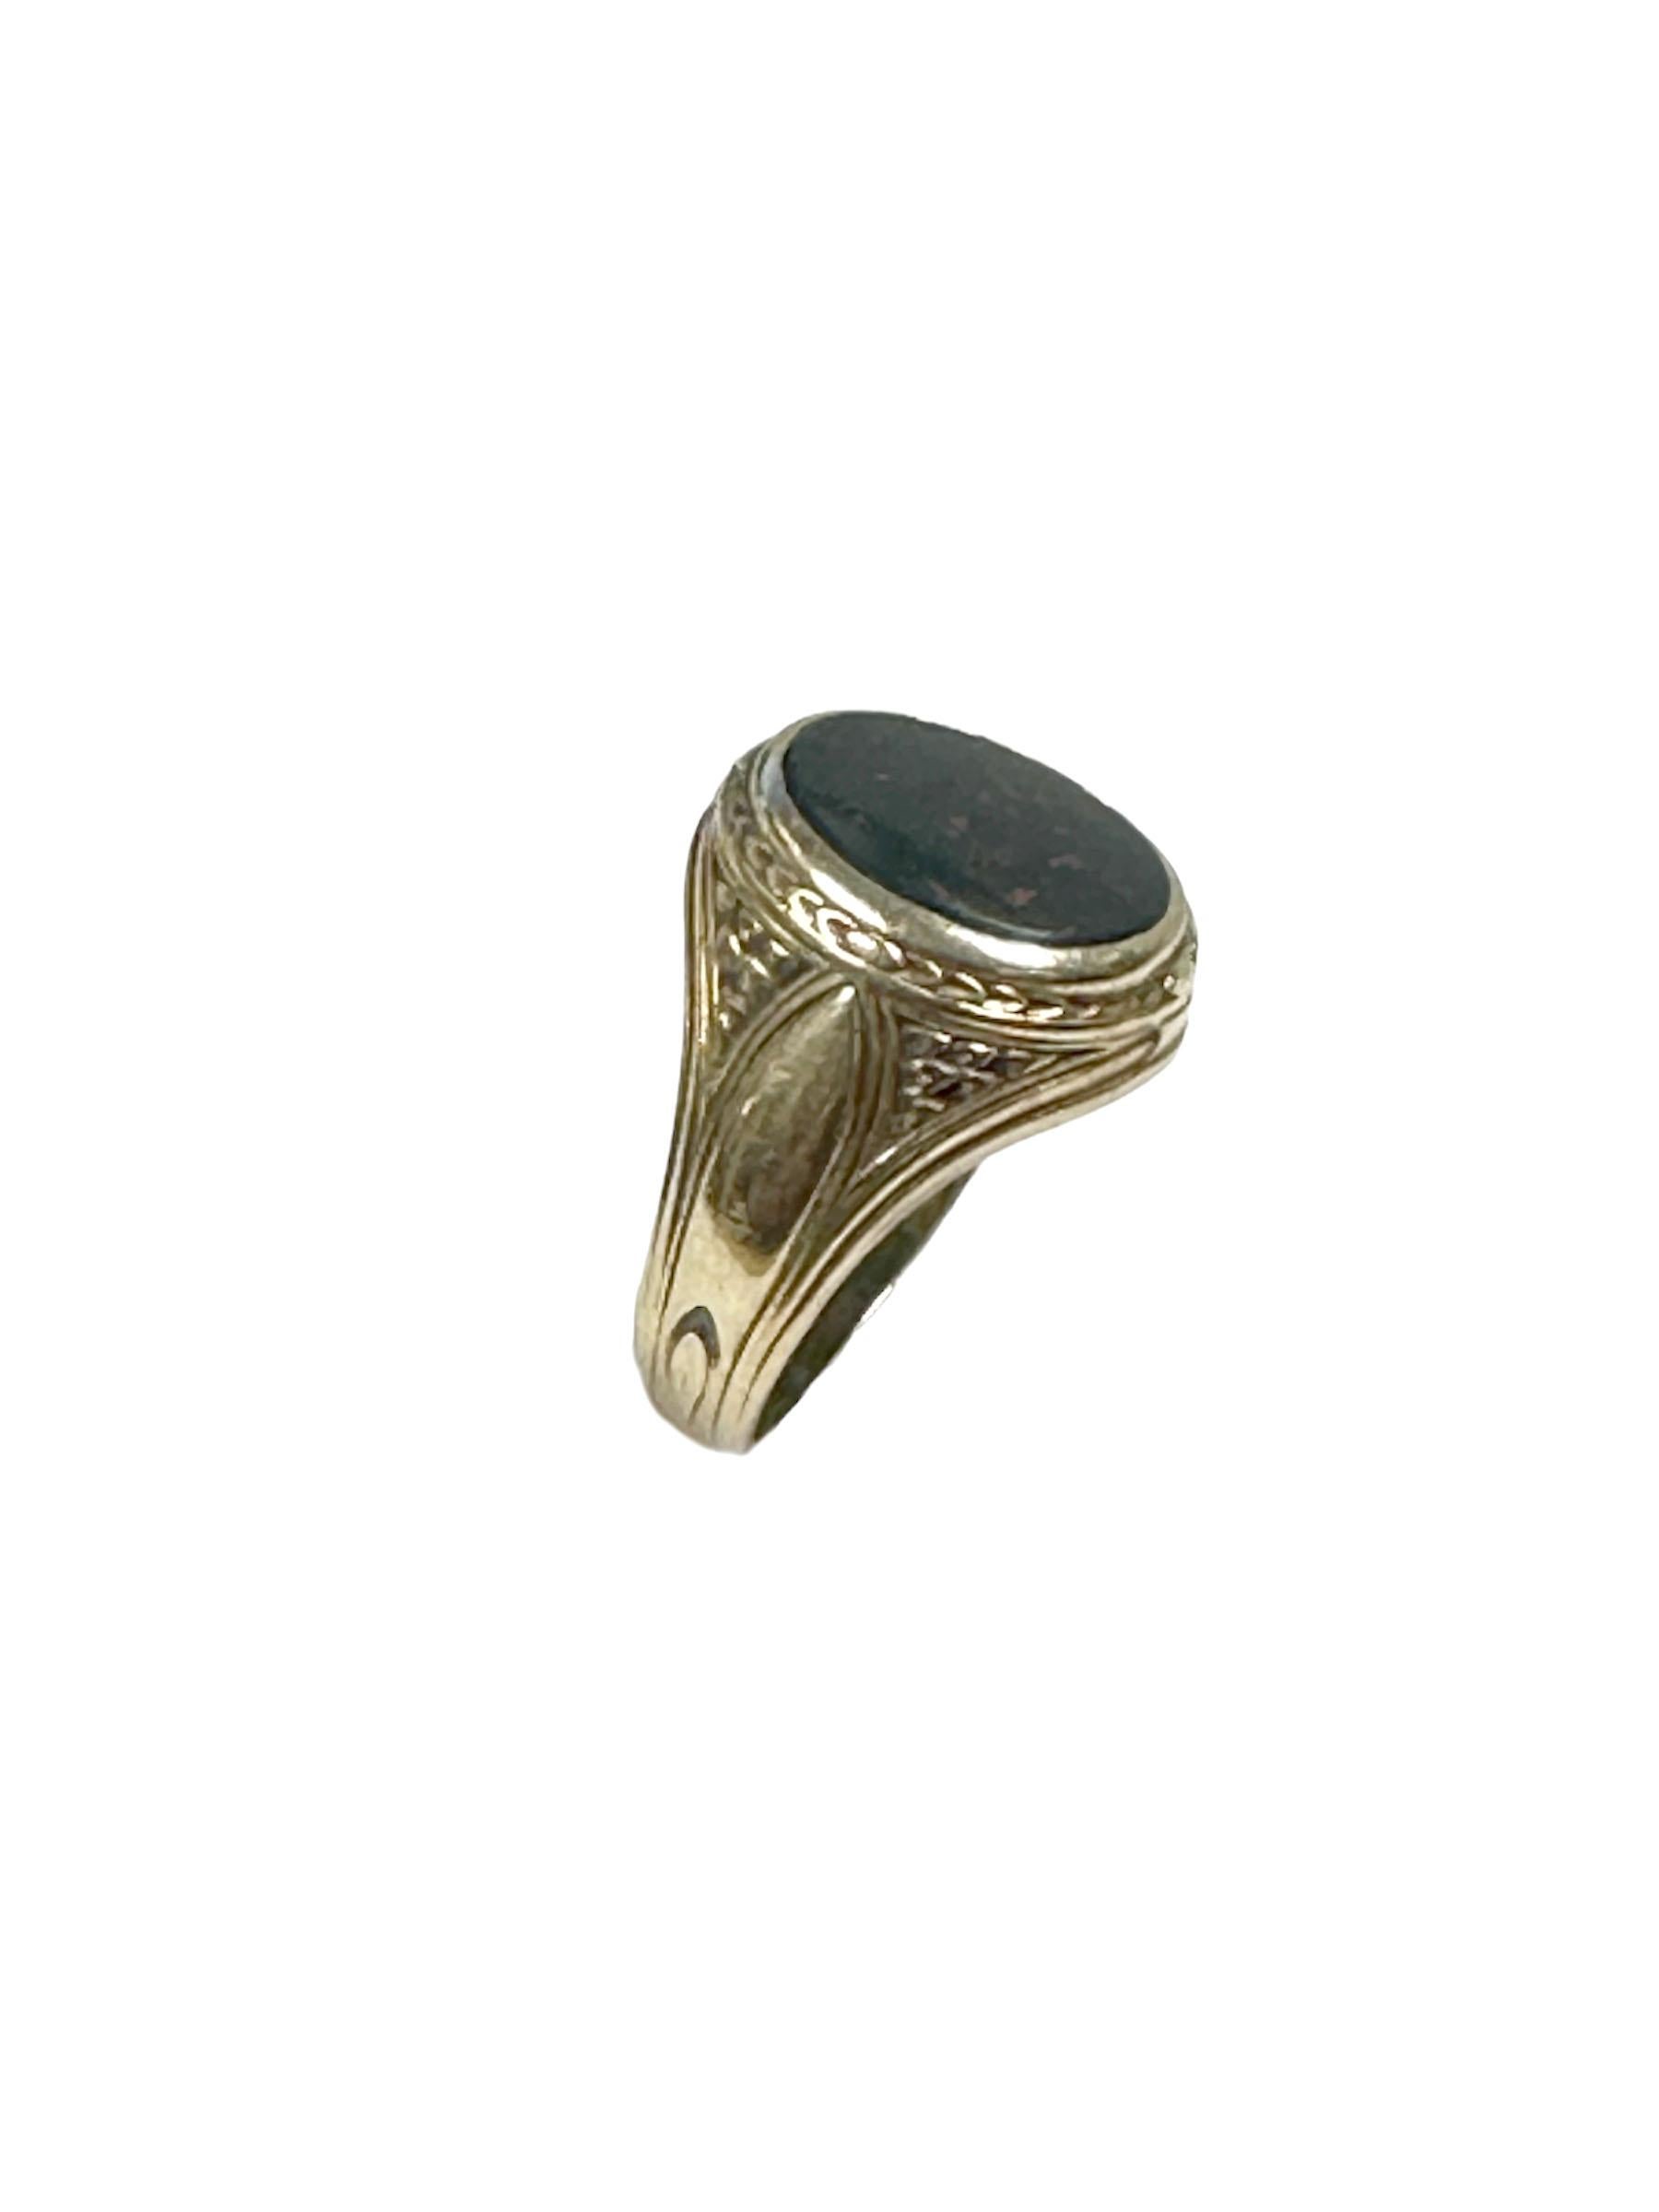 Circa 1910 10k yellow Gold Signet Ring, the top of the ring measures 5/8 x 1/2 inch and is set with a Blood Stone, nicely chased designed sides in an Edwardian style. Finger size 7.